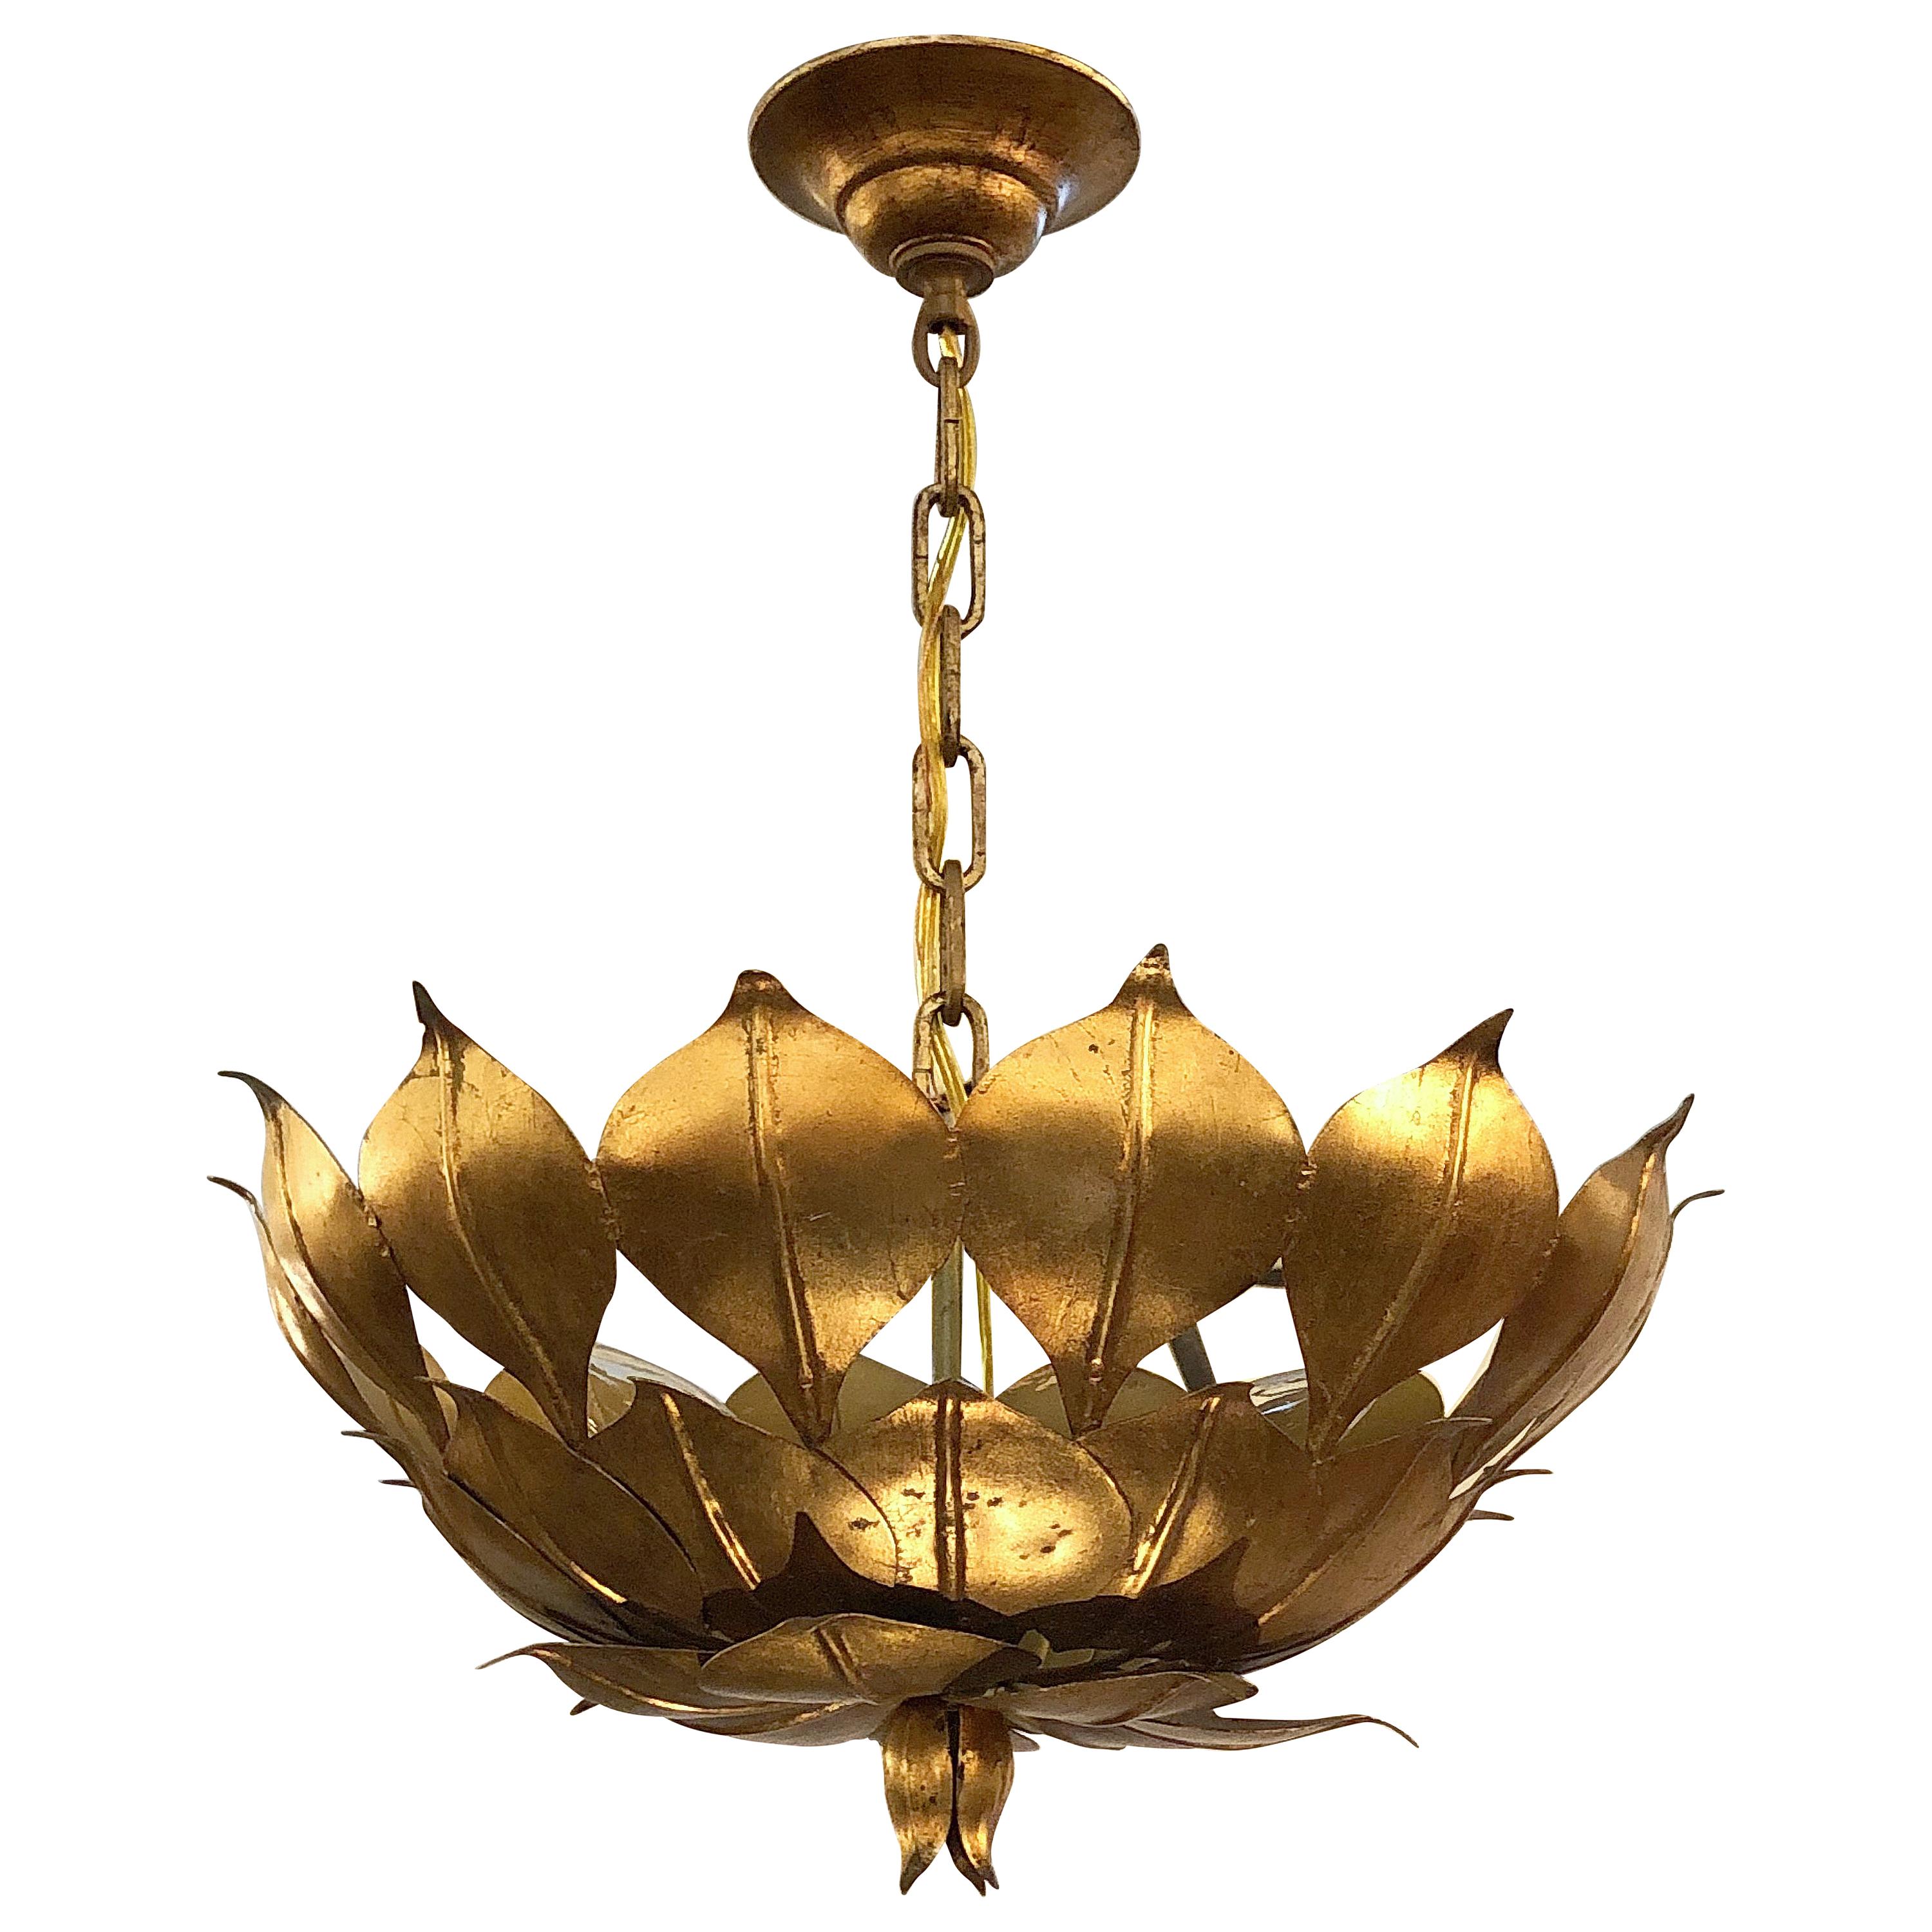 French Gilt Three-Light Hanging Fixture with Lotus or Leaf Design (18" Diameter)